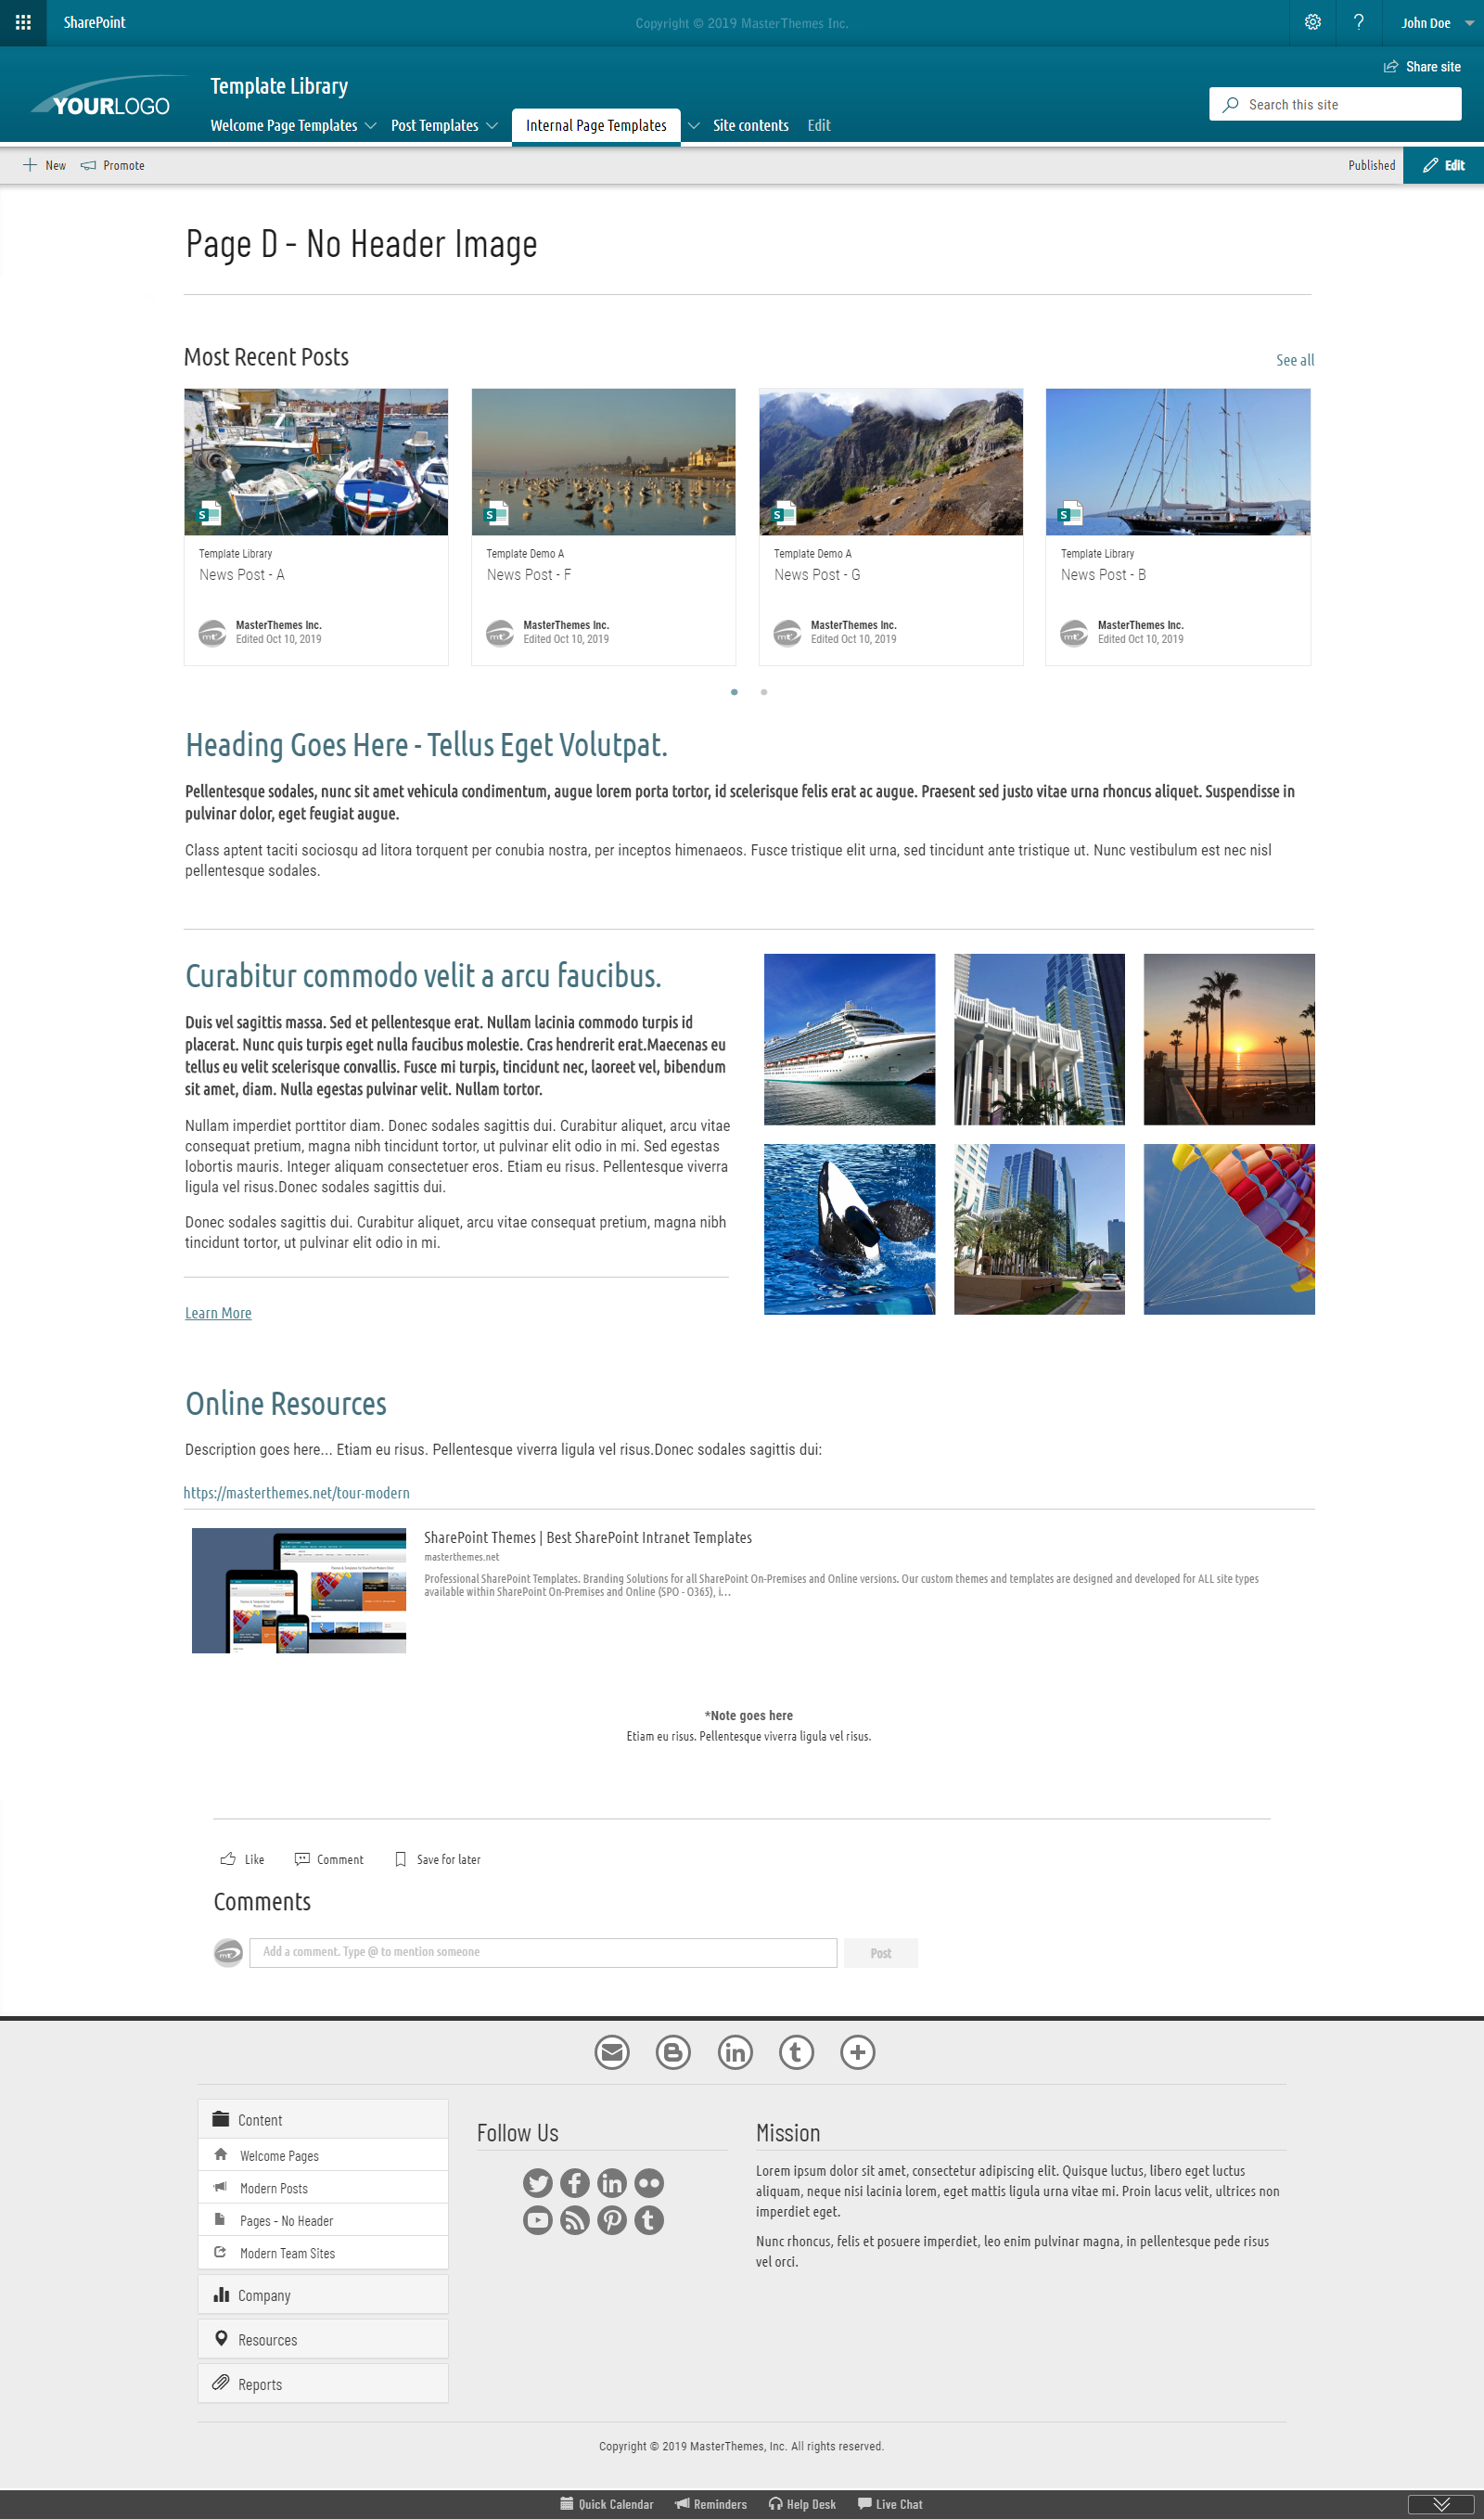 Layout Template - Page D without Header Image - Modern Template for SharePoint 2019